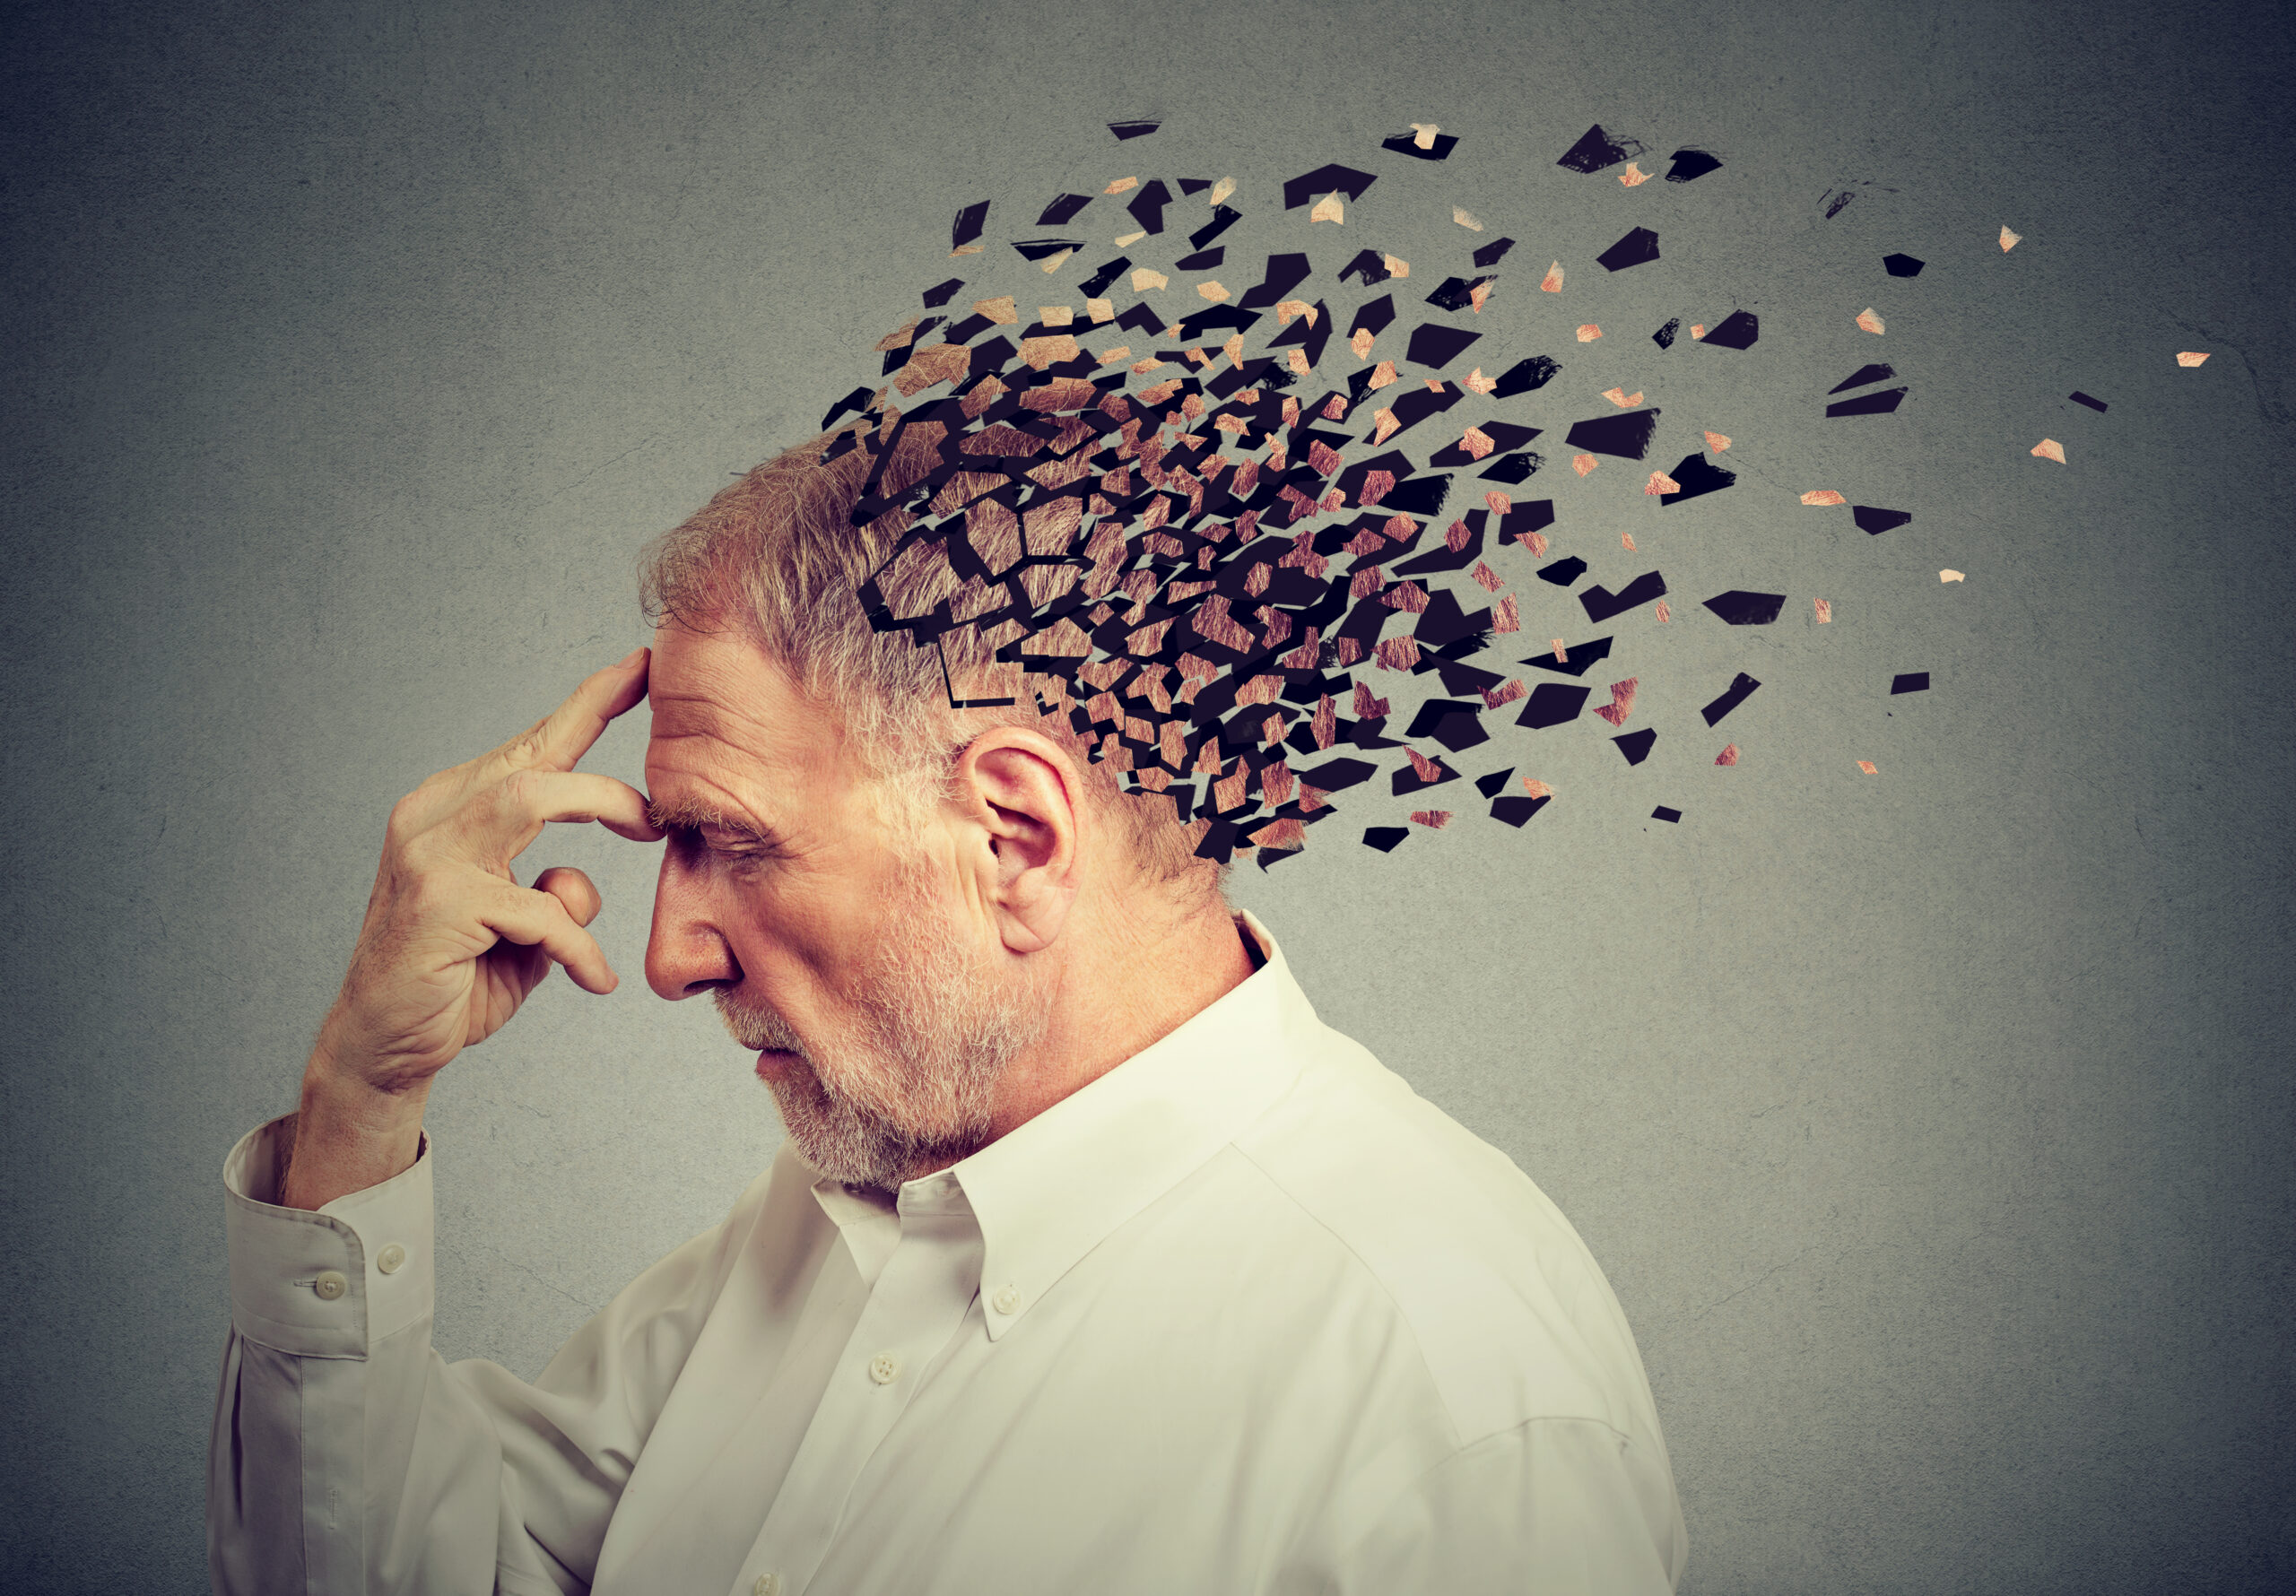 Early Signs of Cognitive Decline: When to Seek Help